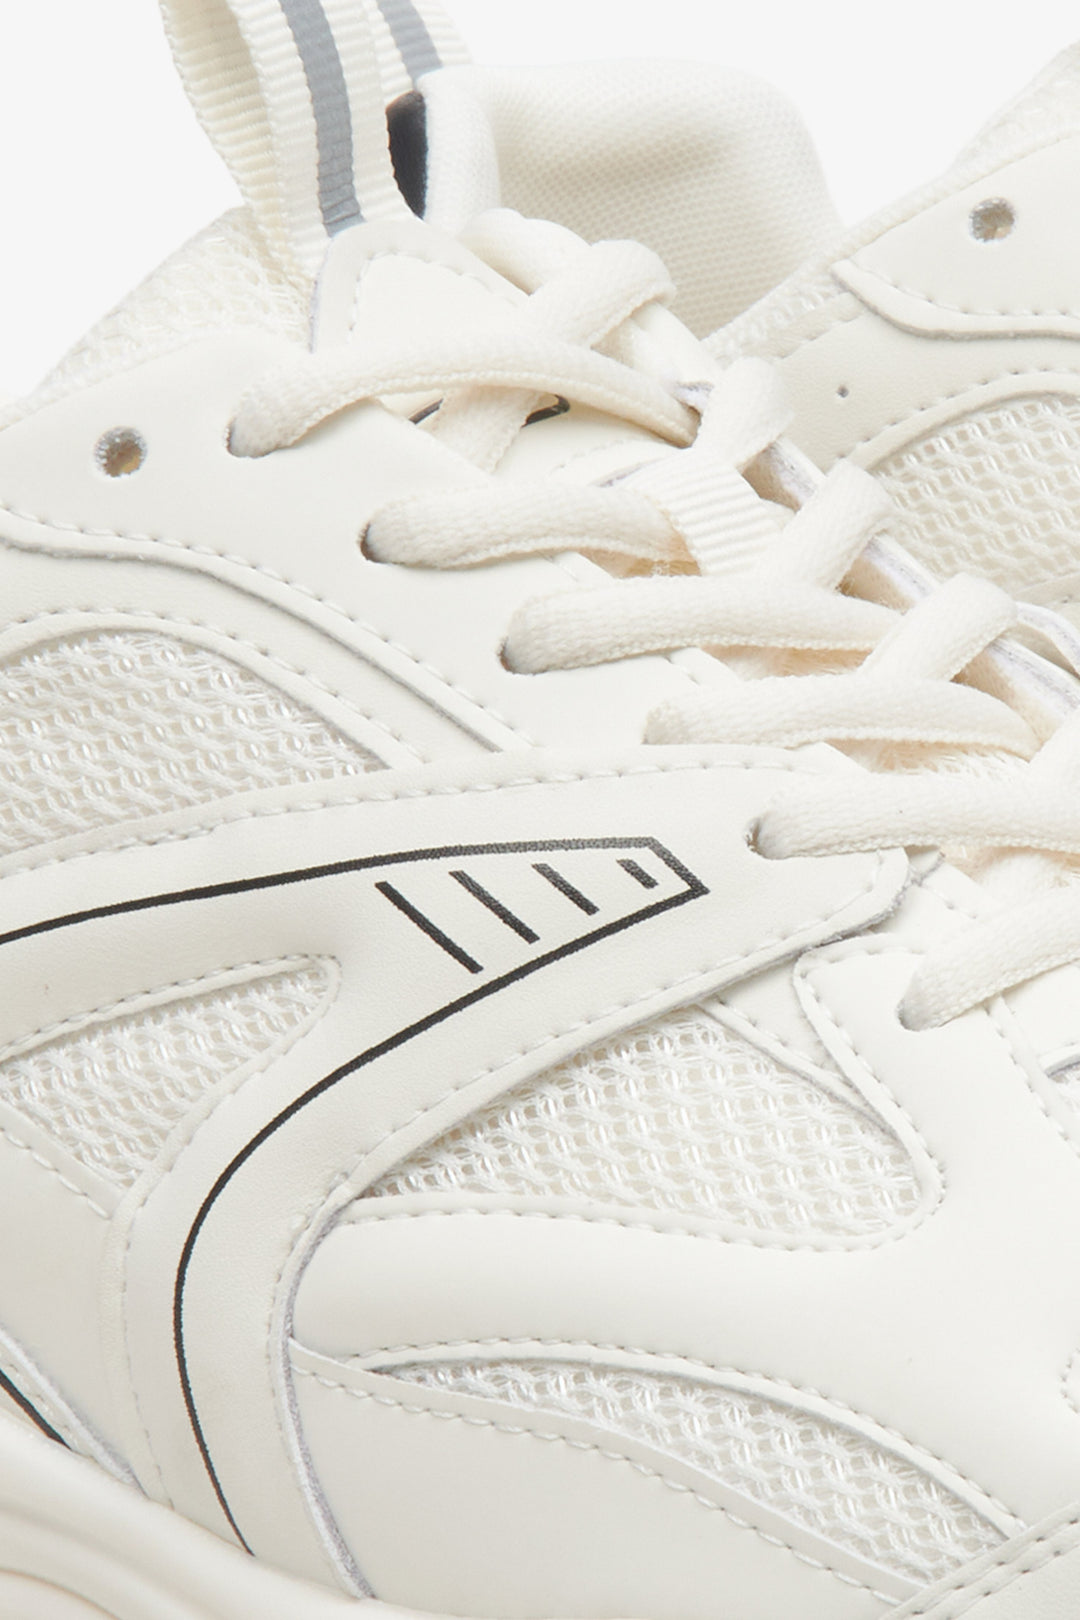 ES8 women's sporty sneakers in  beige colour - close-up on the details.